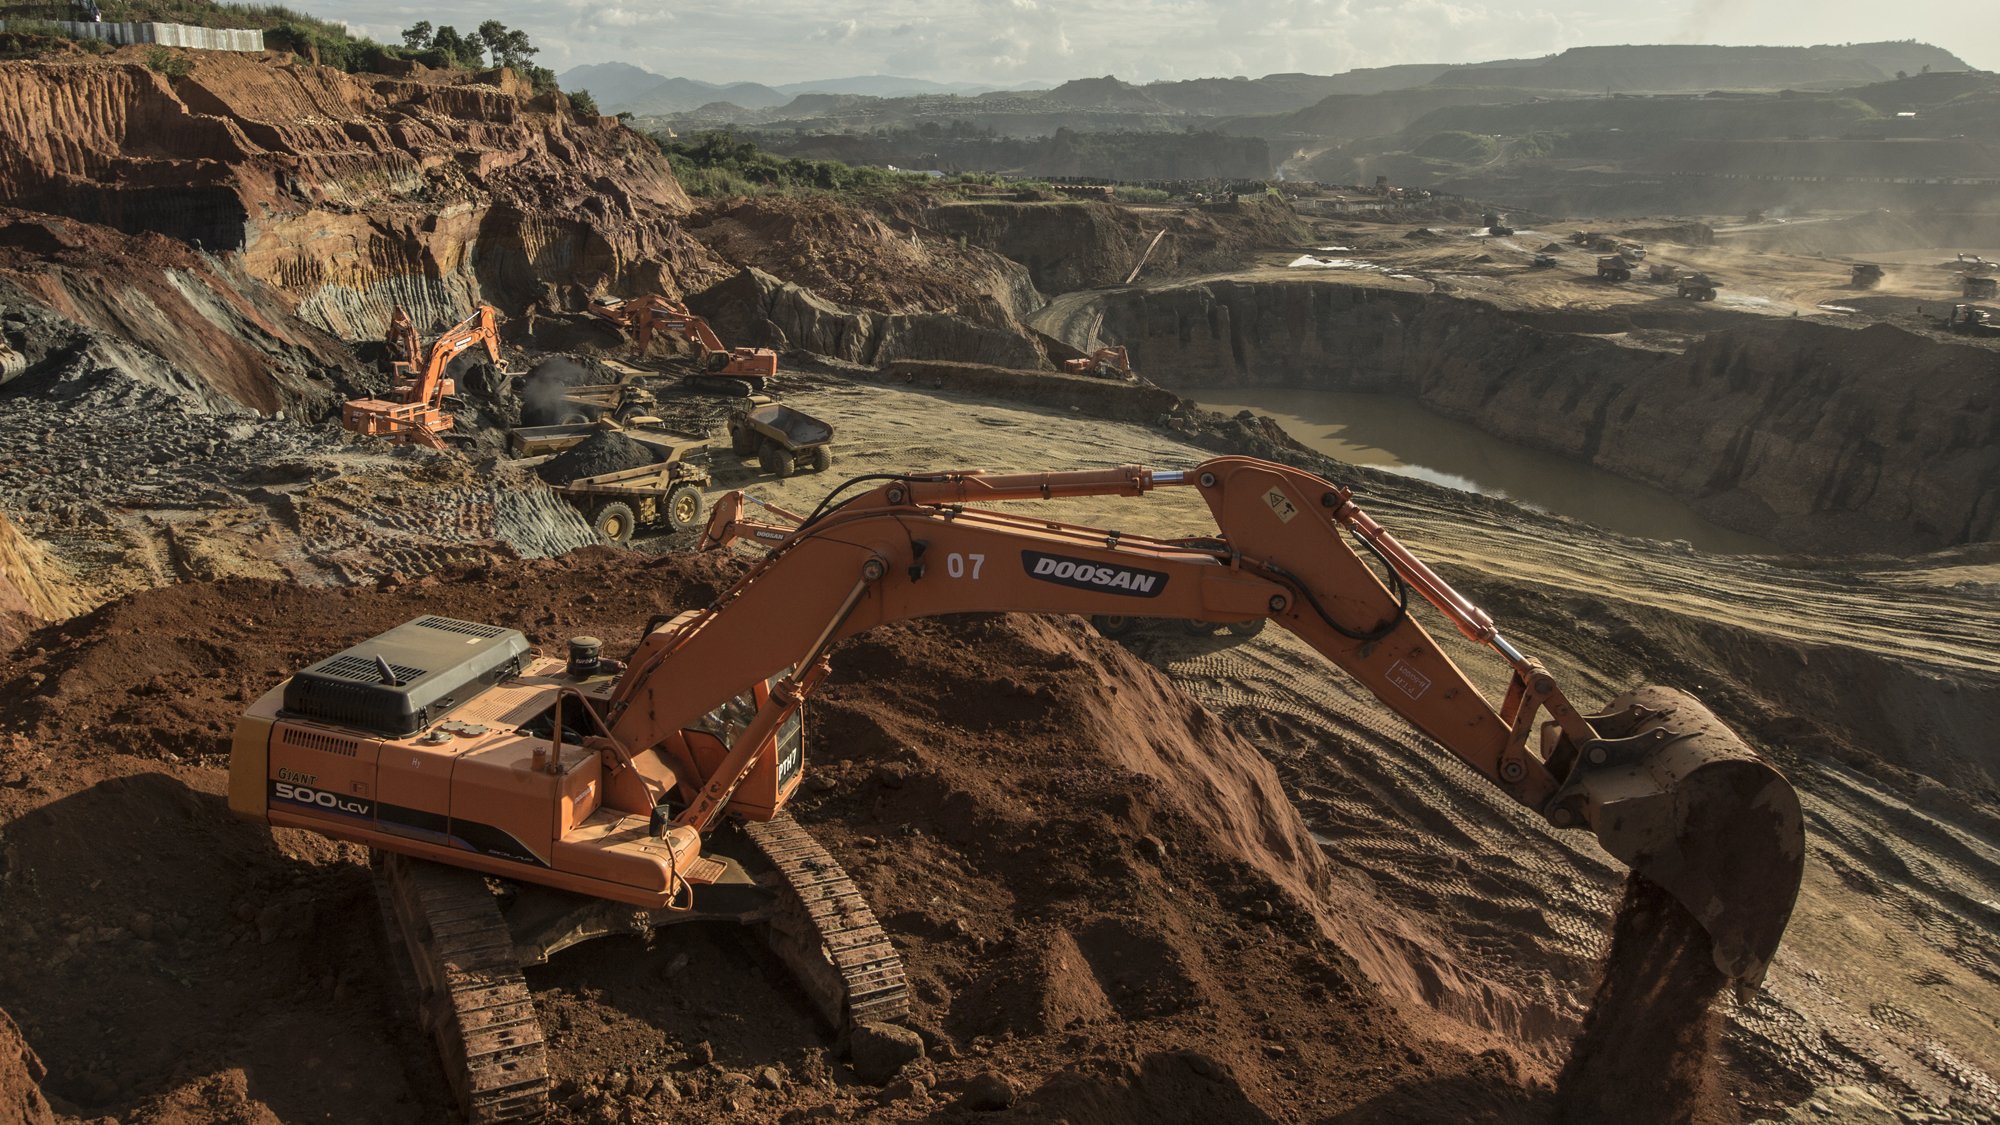 Diggers at a jade mining area near Hpakant township in Kachin state. (Global Witness)